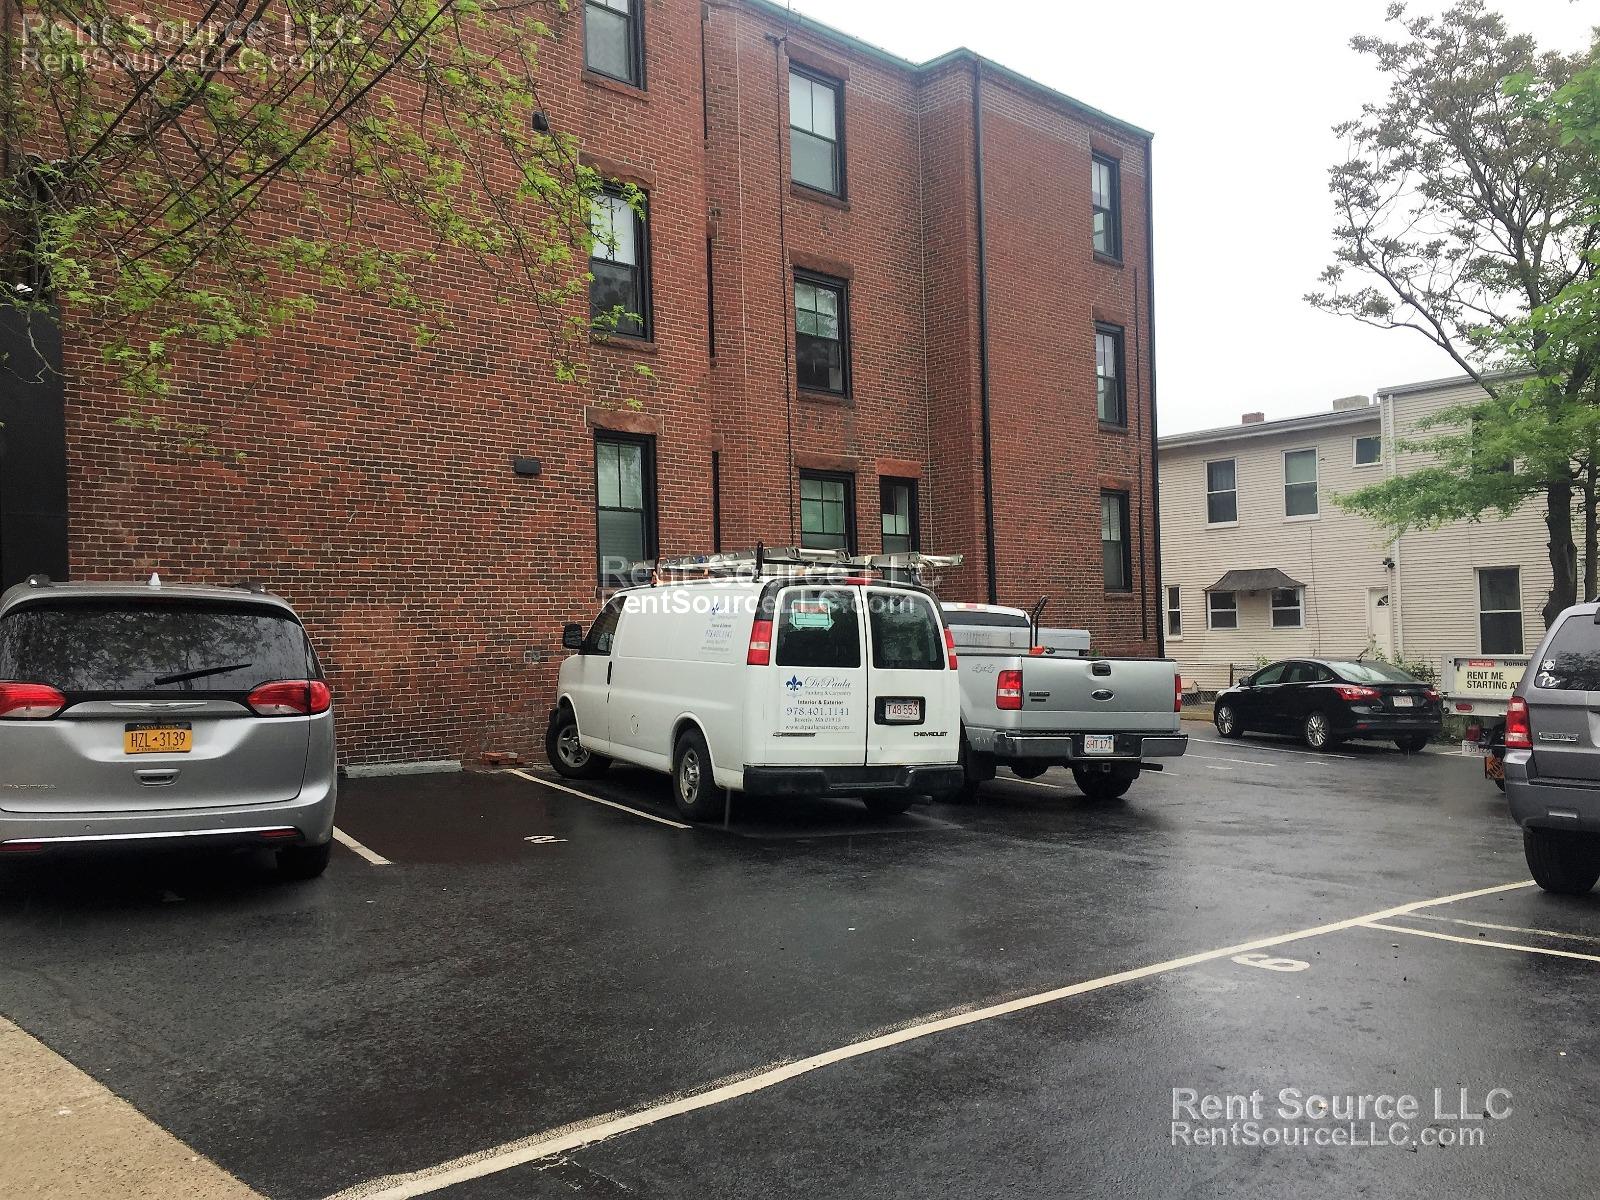 Photos of apartment on Perkins St.,Somerville MA 02145